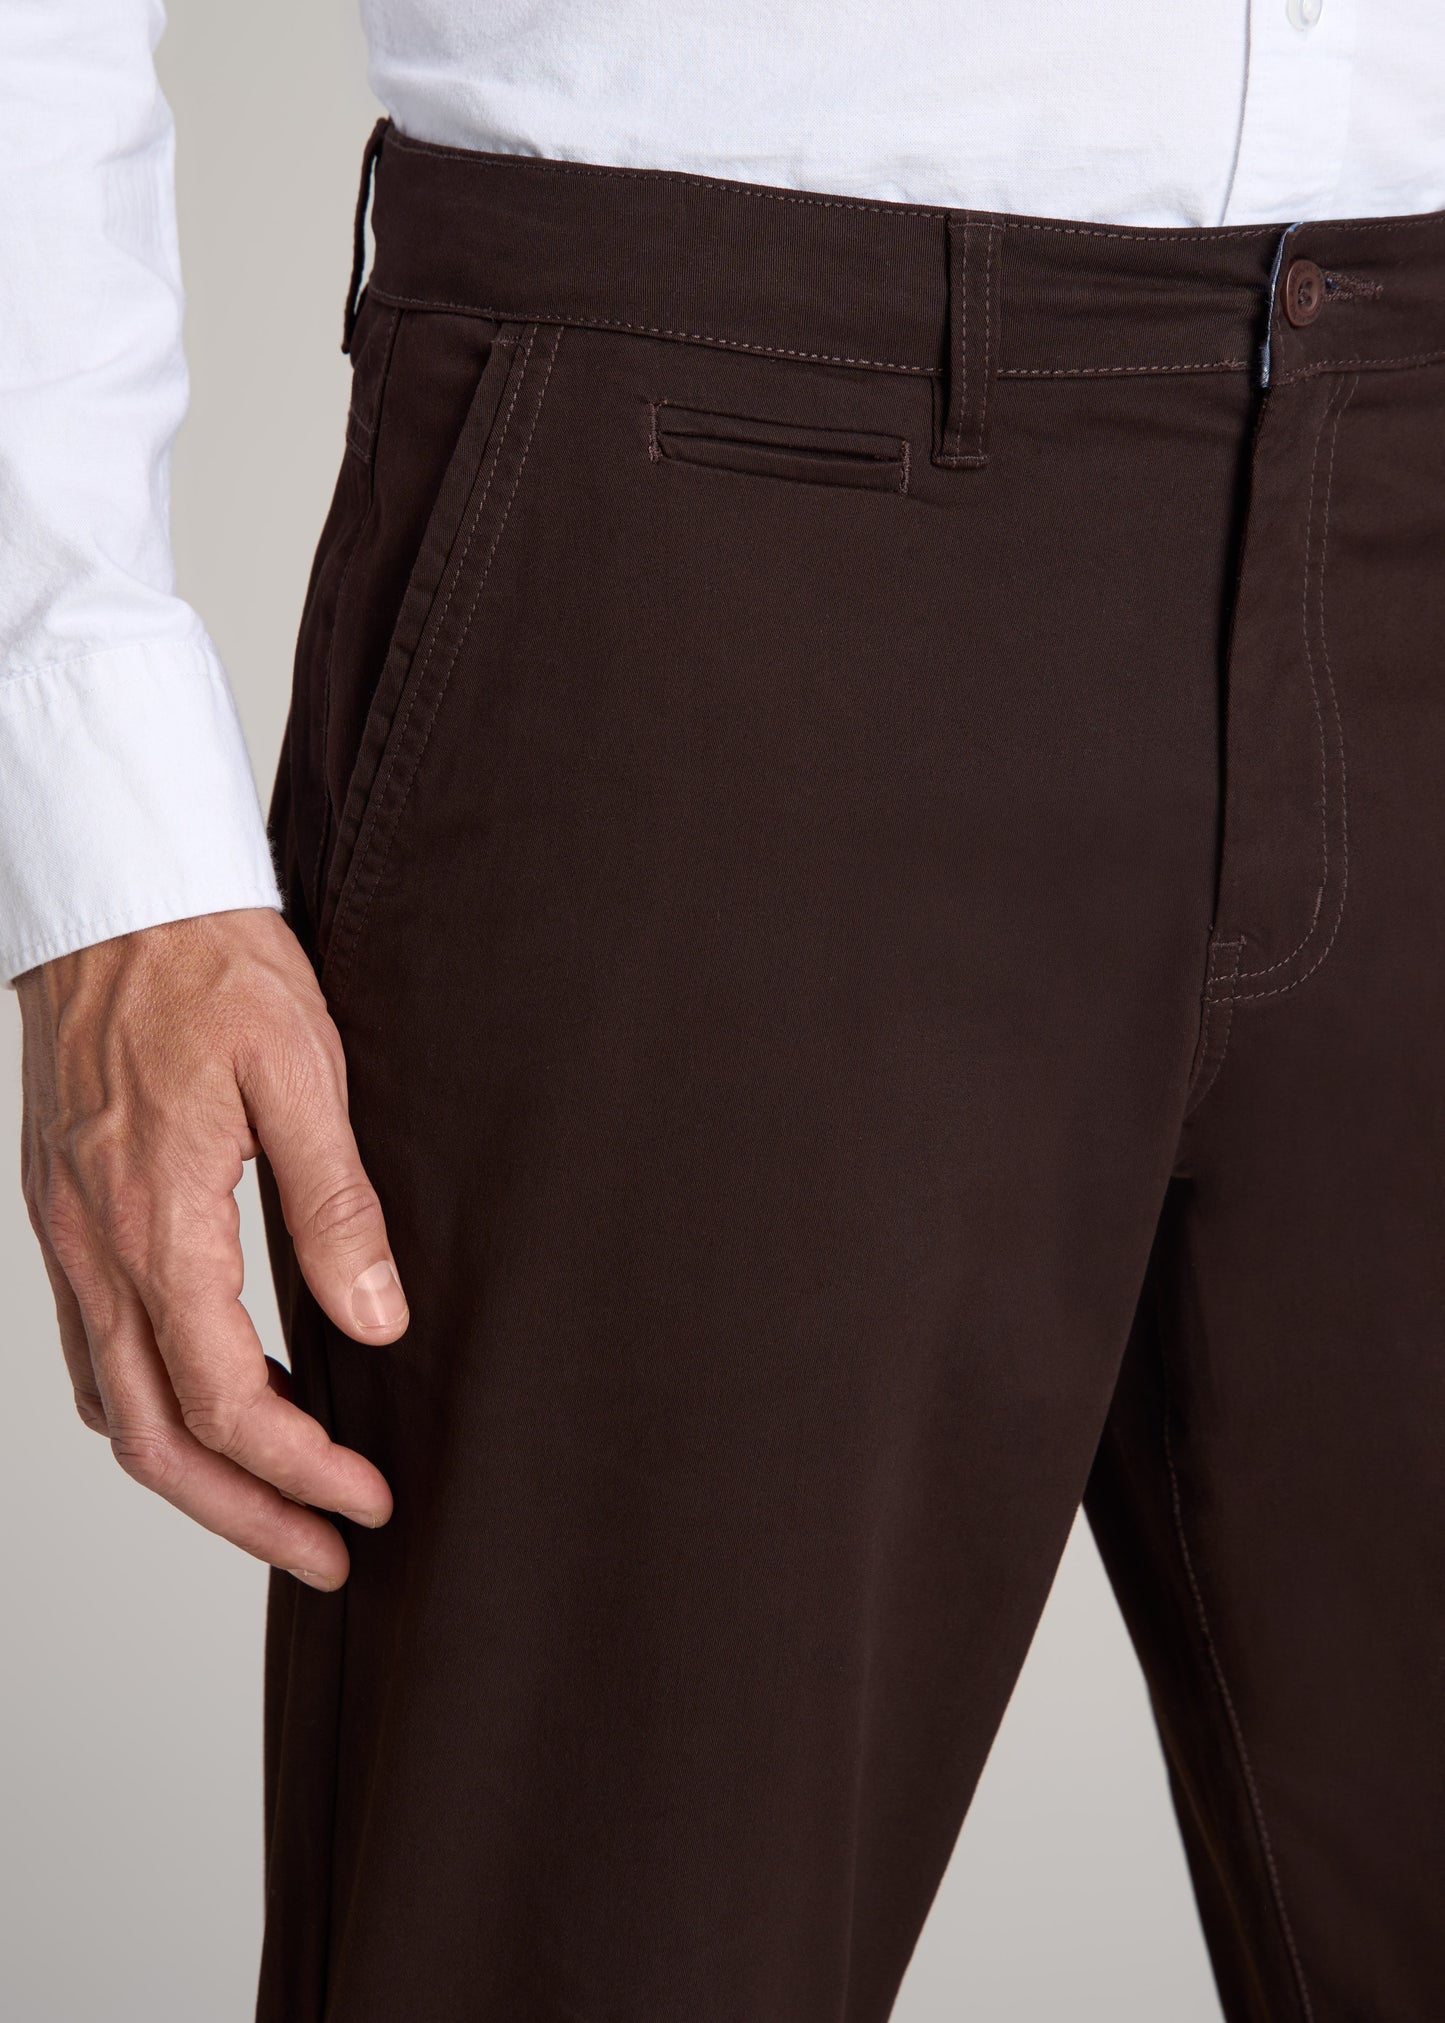 American-Tall-Men-J1-Straight-Fit-Chino-Pant-Chocolate-detail